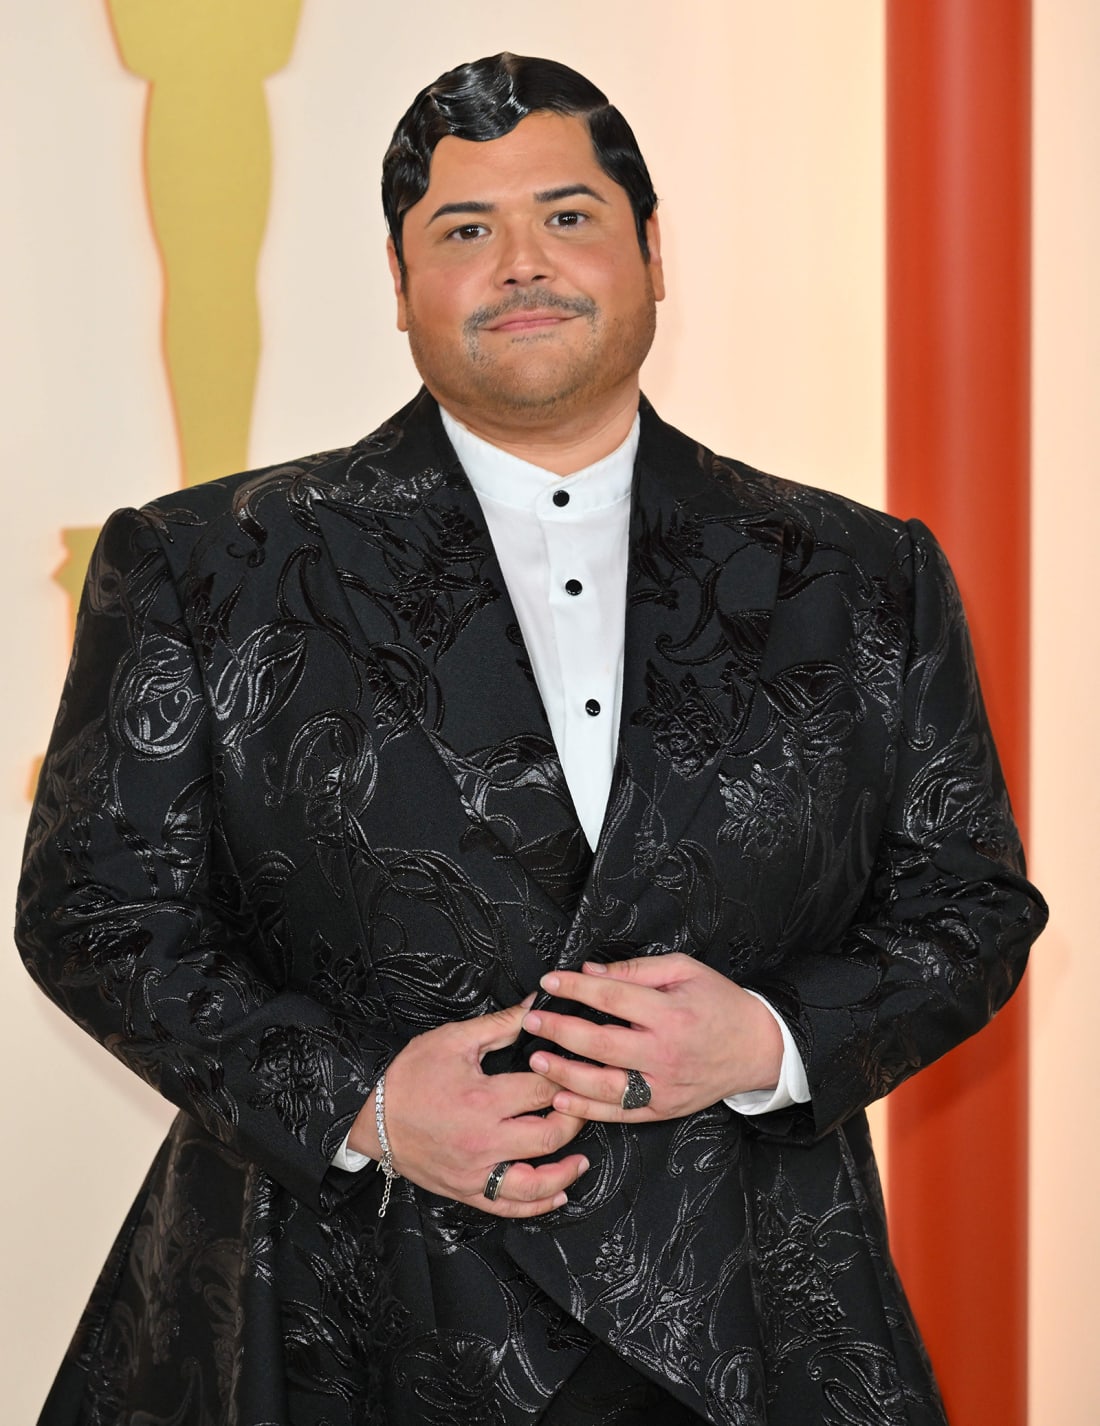 Harvey Guillen, who noted he was the first plus-sized male actor to be dressed by designer, put a twist on the traditional suit with a flared, embellished jacket by Christian Siriano.